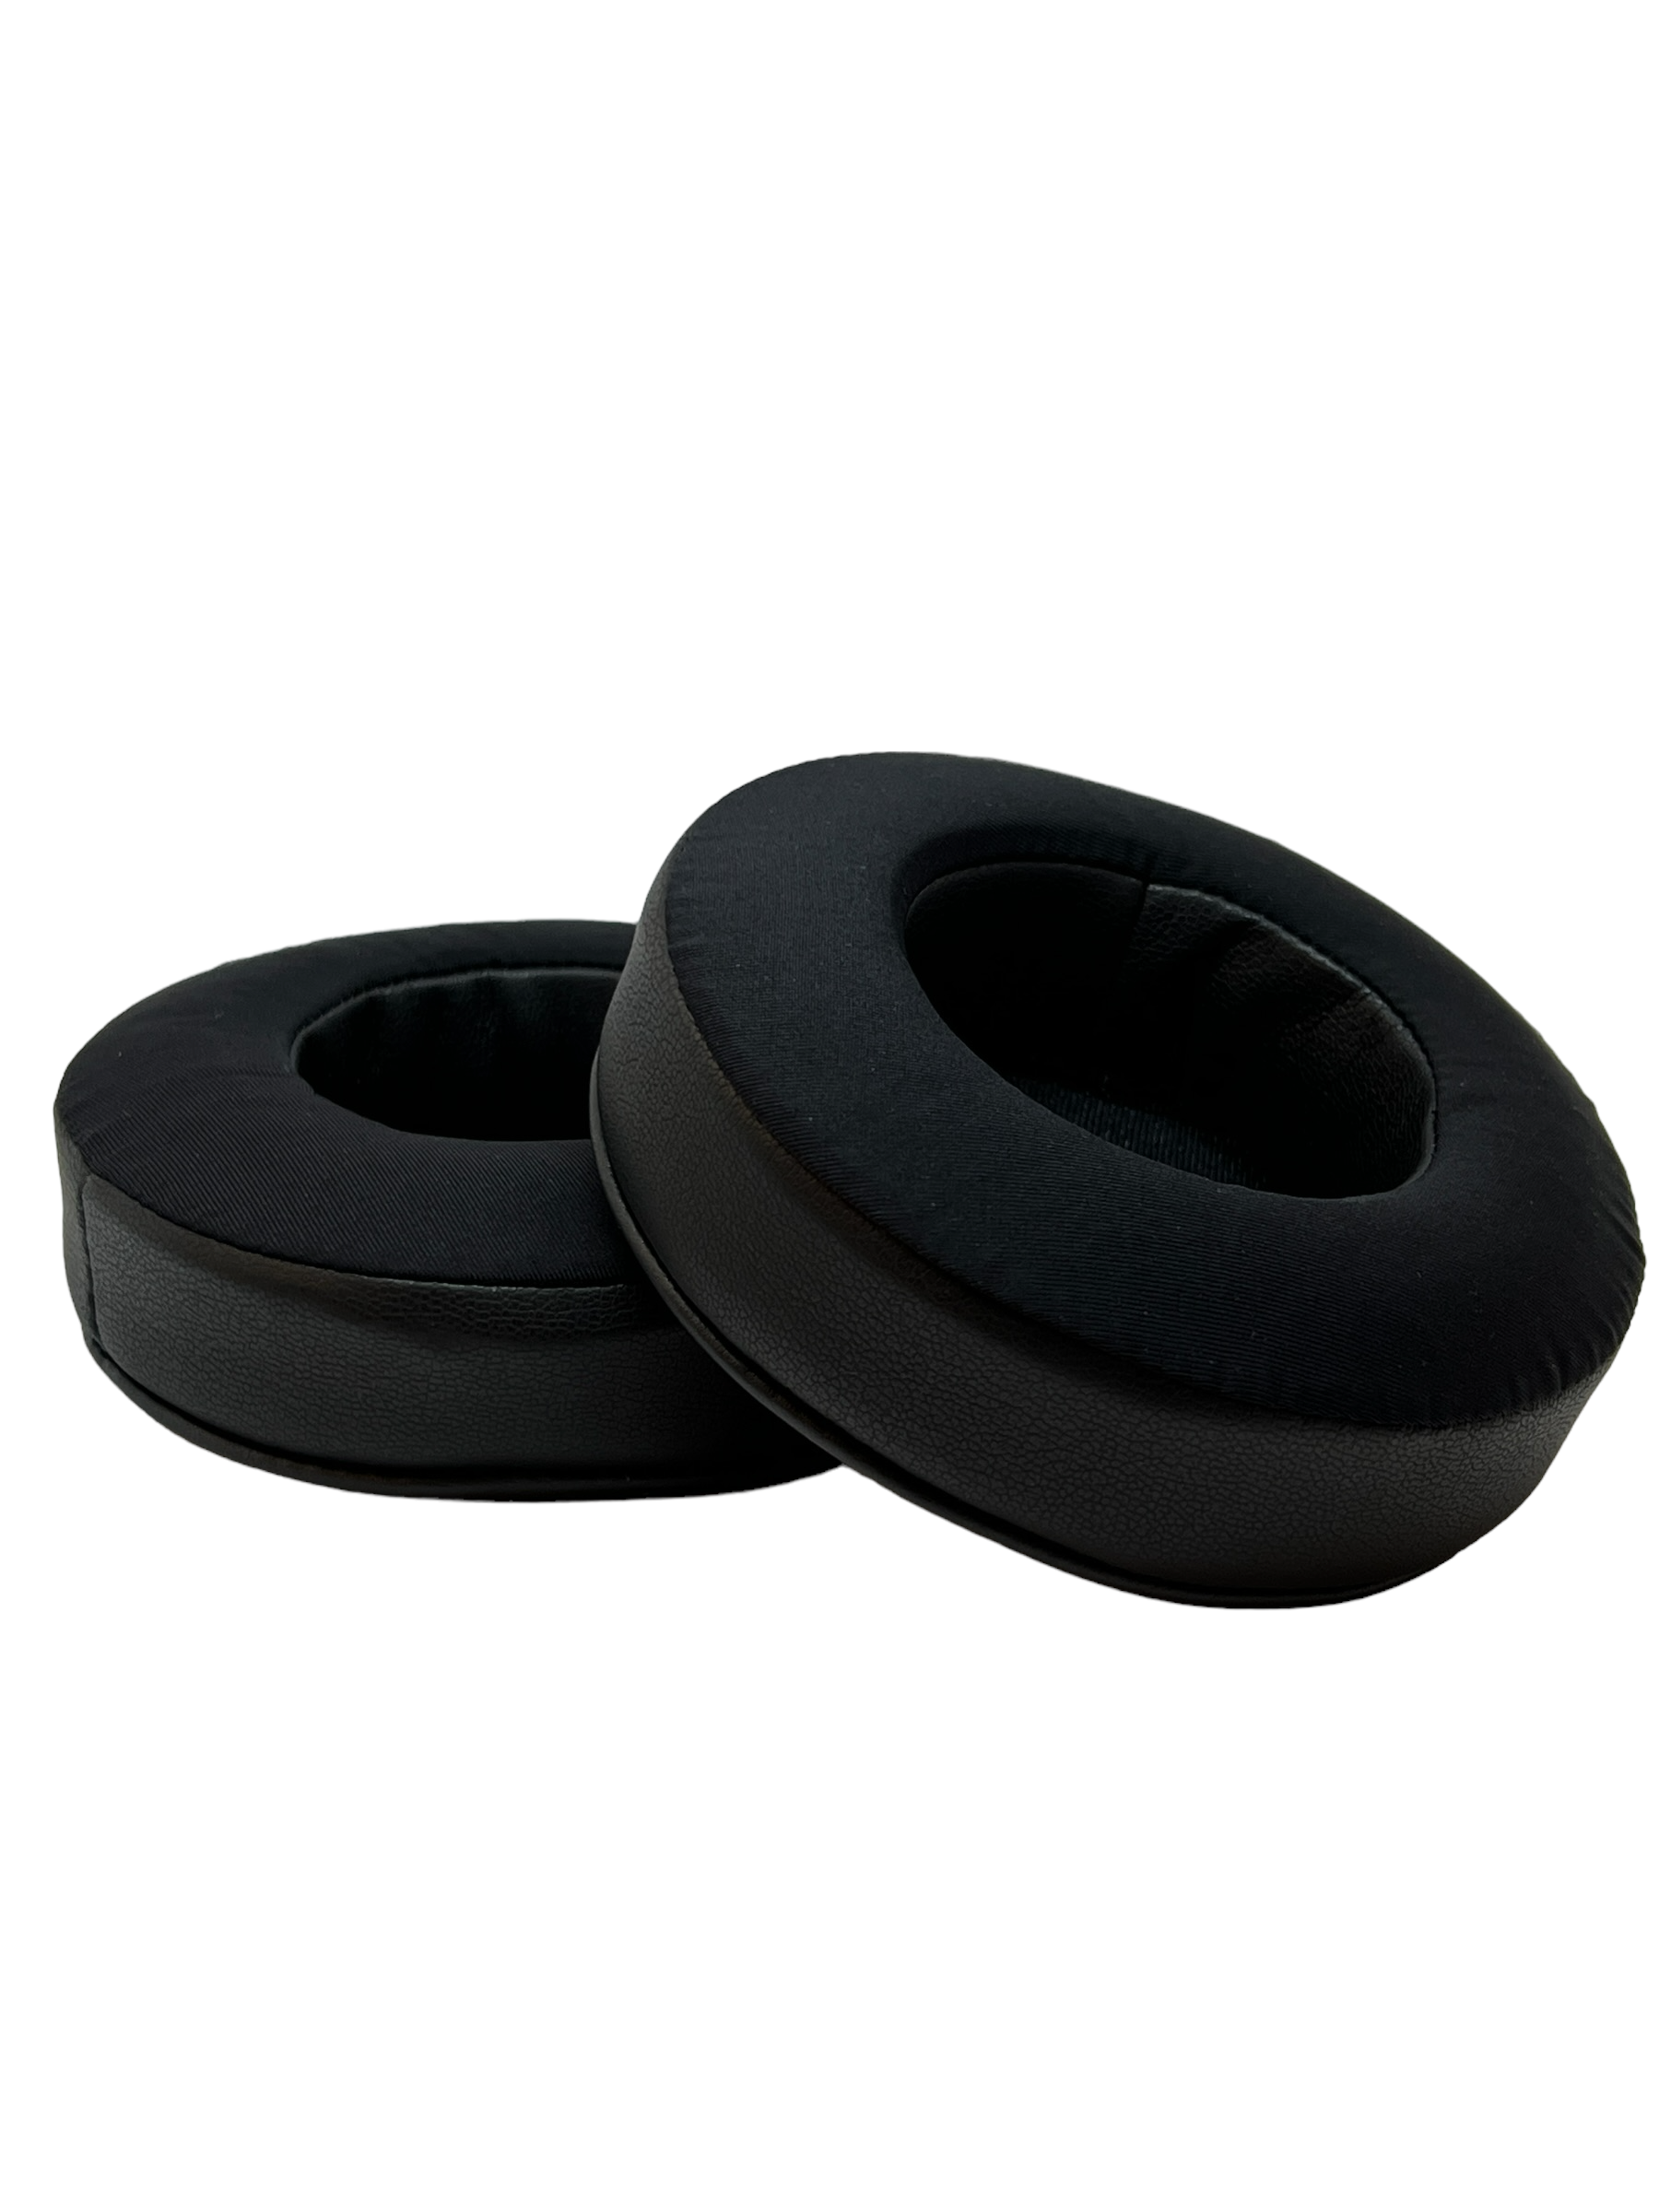 CentralSound Cooling Gel + Memory Foam Premium Replacement Ear Pad Cushions Universal Round 100mm - CentralSound